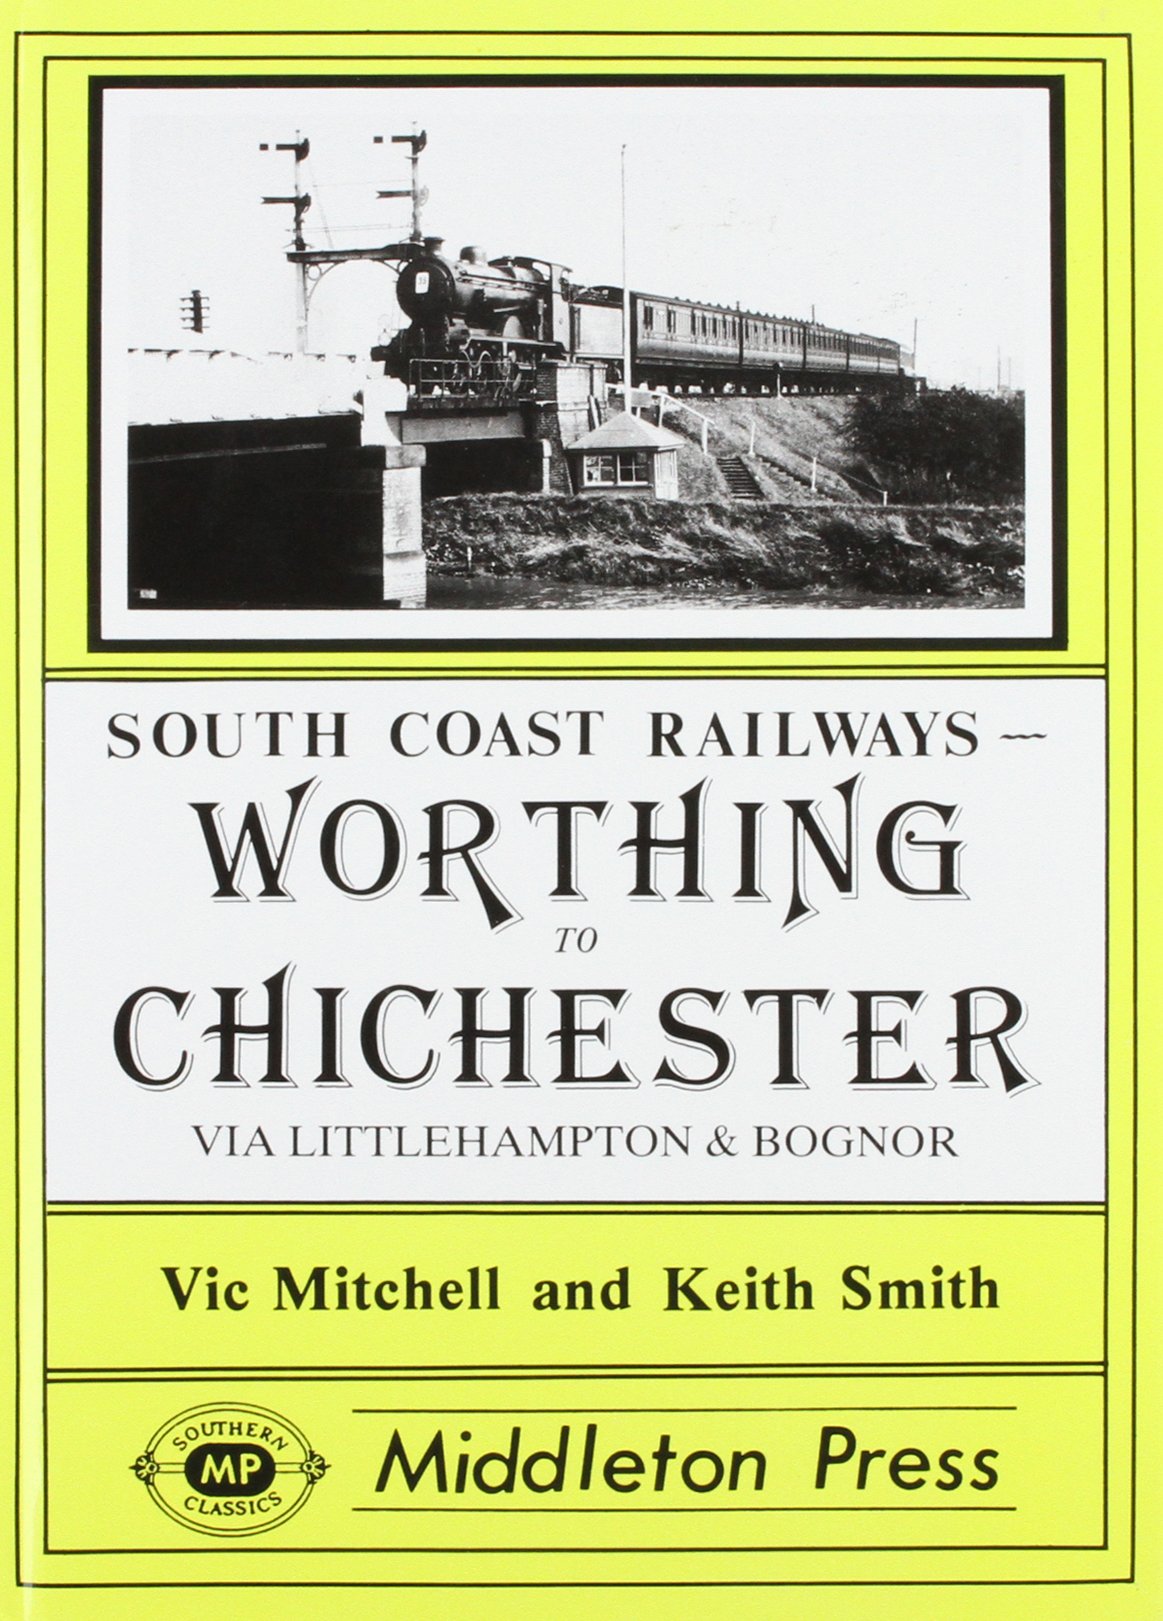 South Coast Railways Worthing to Chichester including Littlehampton and Bognor Regis branches